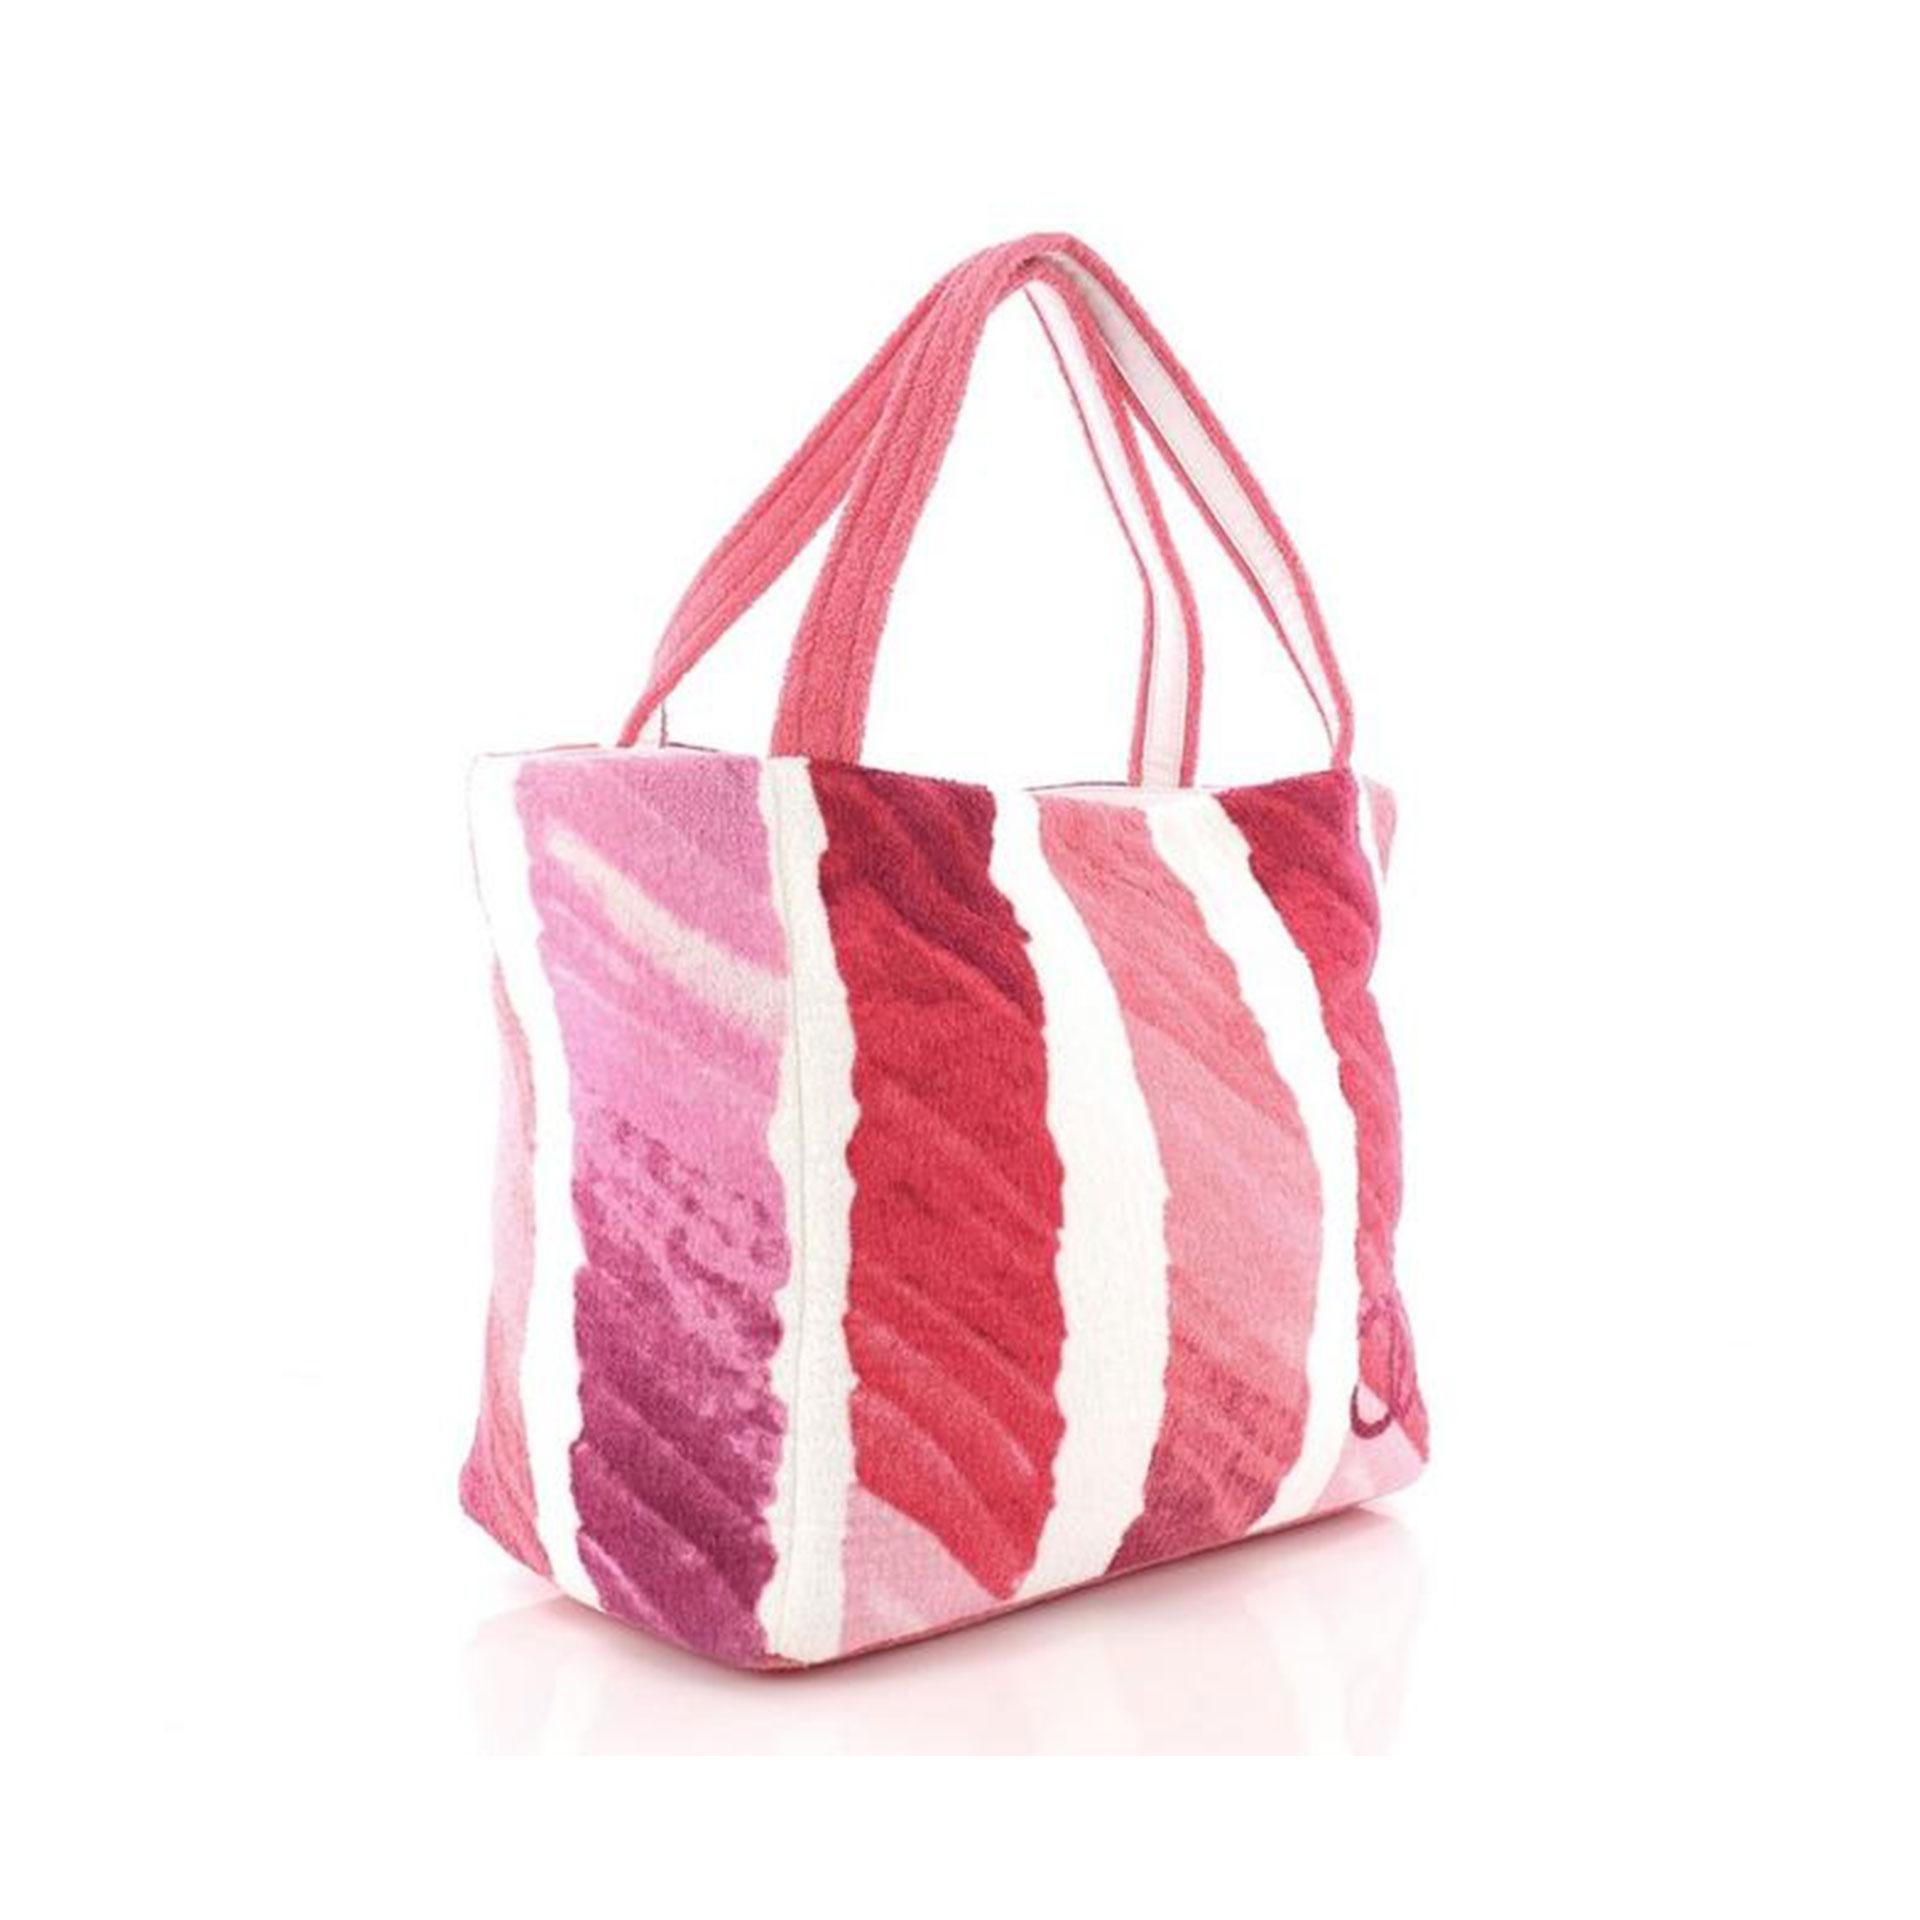 This Chanel CC Beach Tote Terry Cloth Medium, crafted in pink Terry cloth, features dual terry cloth handles, printed CC logo, and silver-tone hardware. It opens to a pink terry cloth interior with slip pockets.

Condition: Excellent. Light wear and